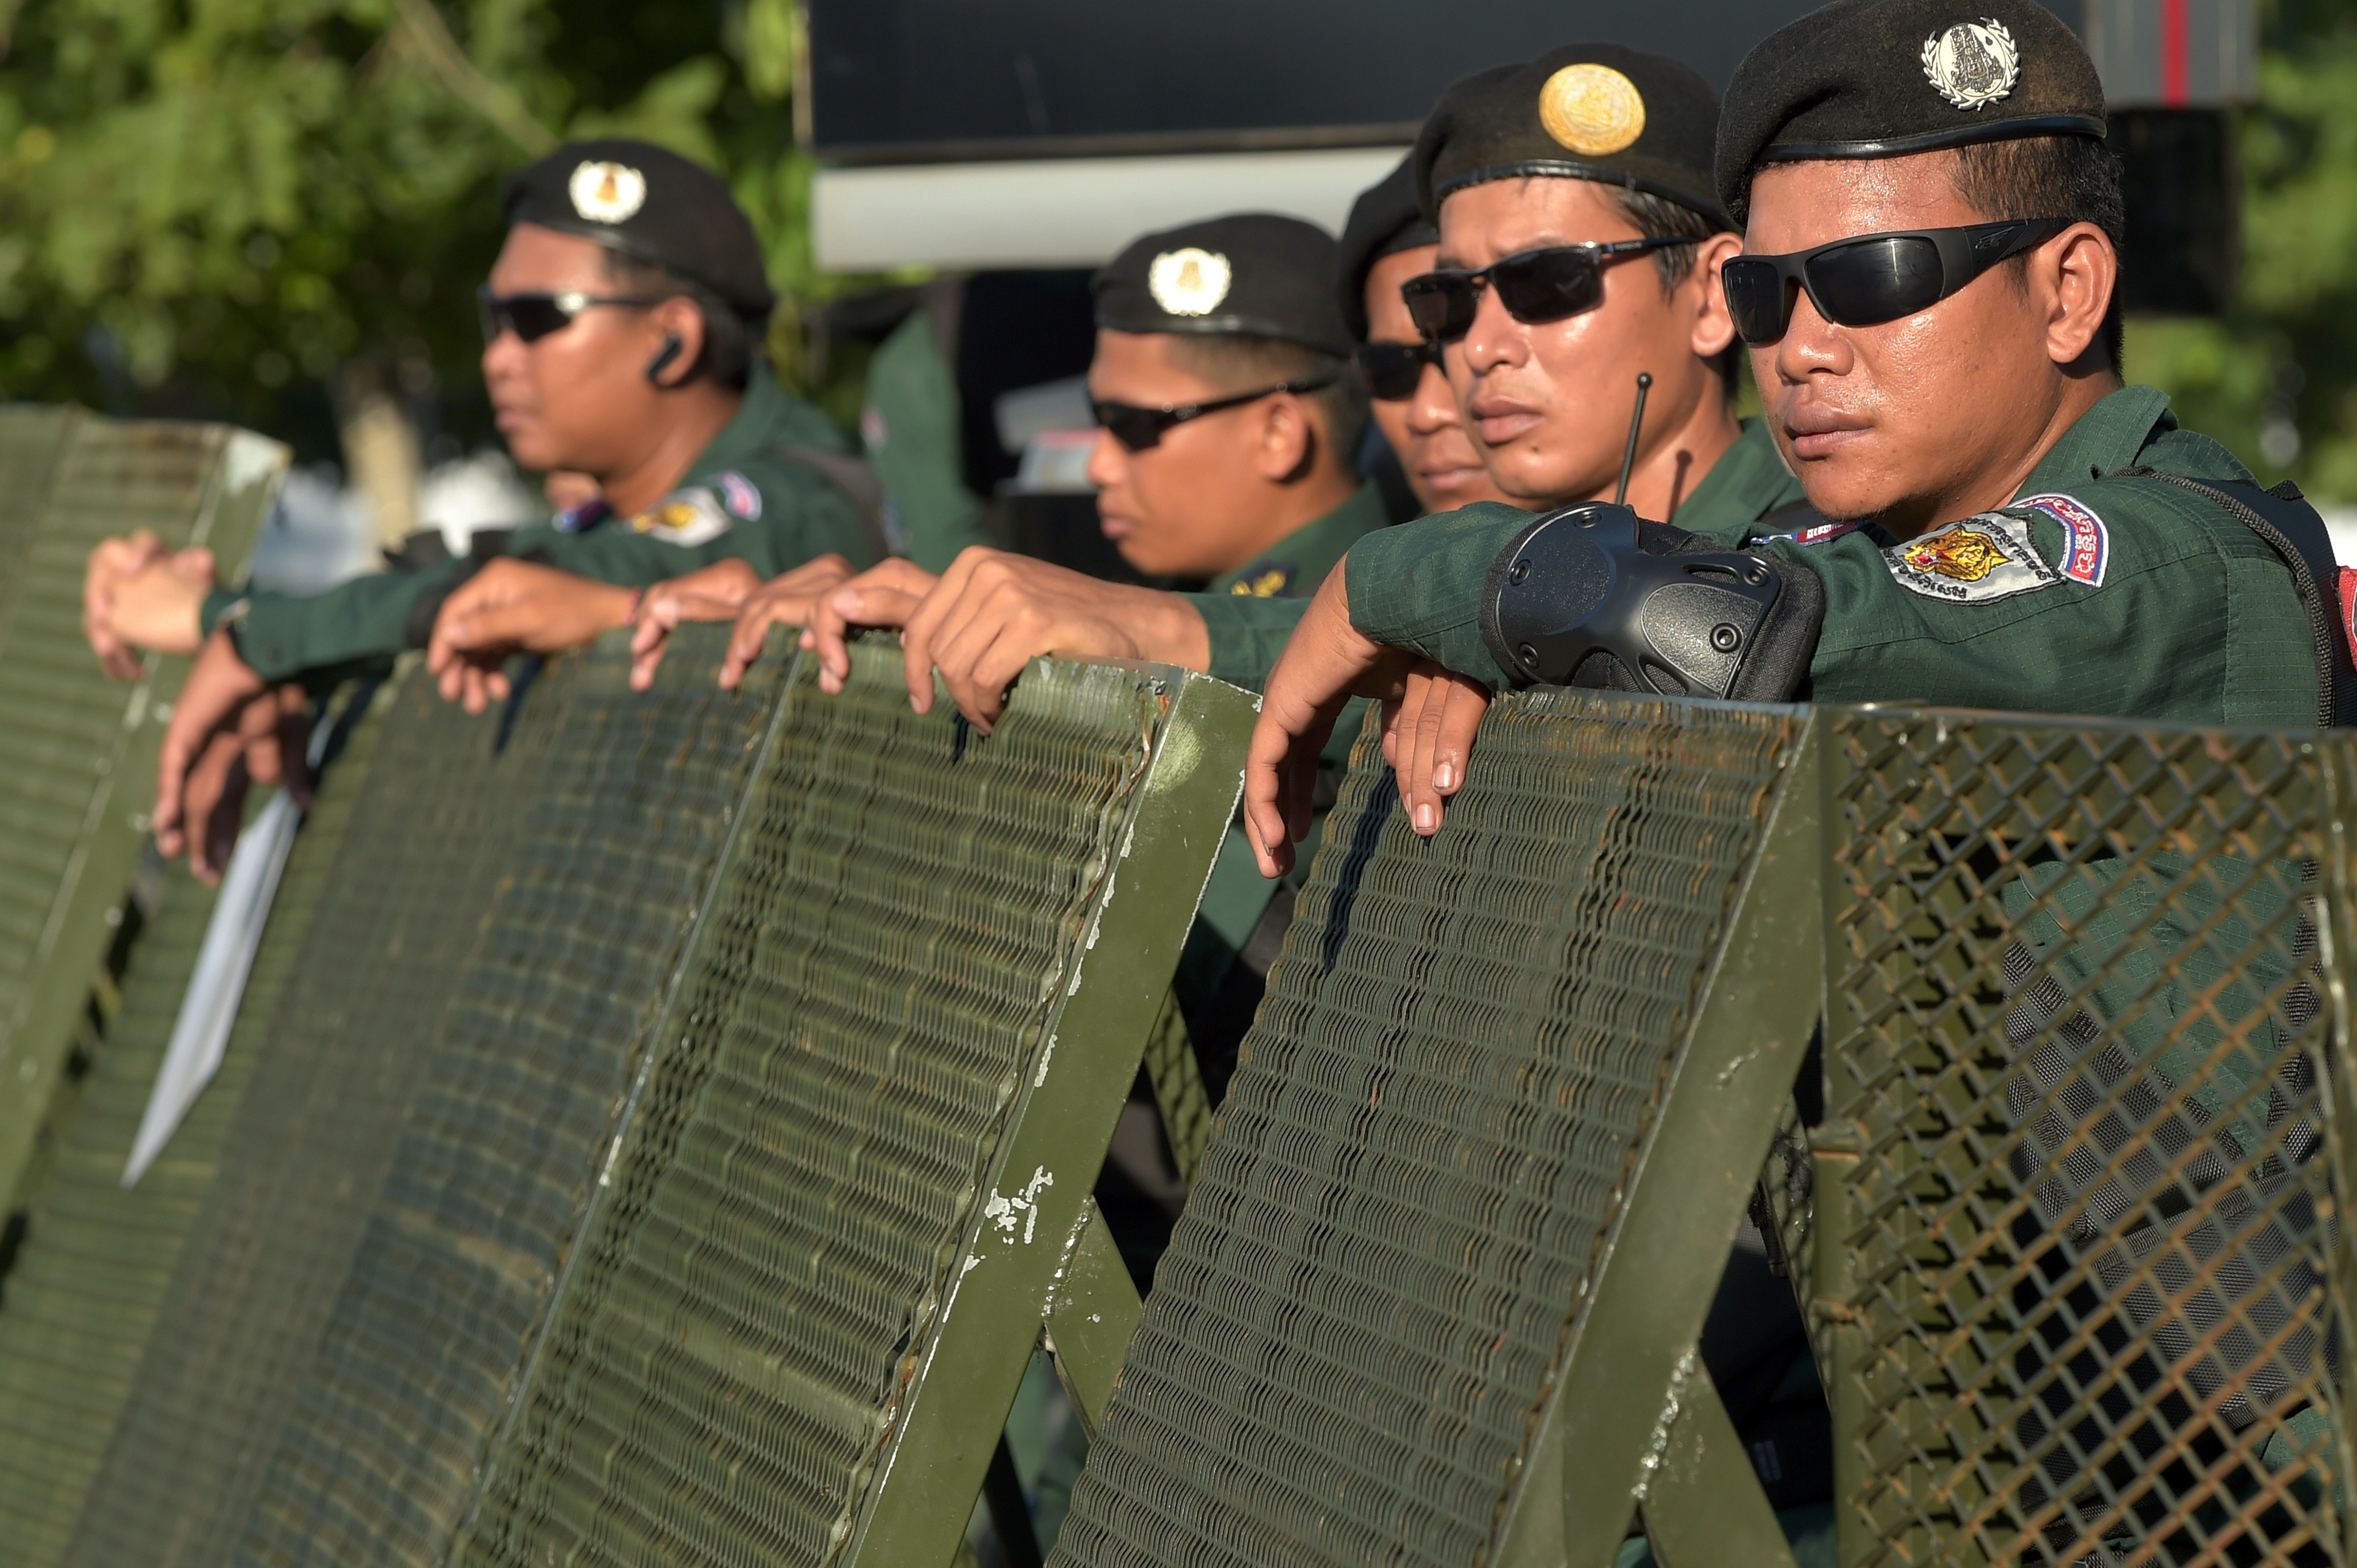 Cambodian police officials block a street during a hearing at the Supreme Court in Phnom Penh on November 16, 2017.
                      Cambodian police locked down streets around the Supreme Court on November 16 ahead of an expected ruling on the dissolution of the country's main opposition party, a move rights groups warn would strip 2018 elections of any credibility. / AFP PHOTO / TANG CHHIN SOTHY        (Photo credit should read TANG CHHIN SOTHY/AFP/Getty Images) (Tang Chhin Sothy—AFP/Getty Images)